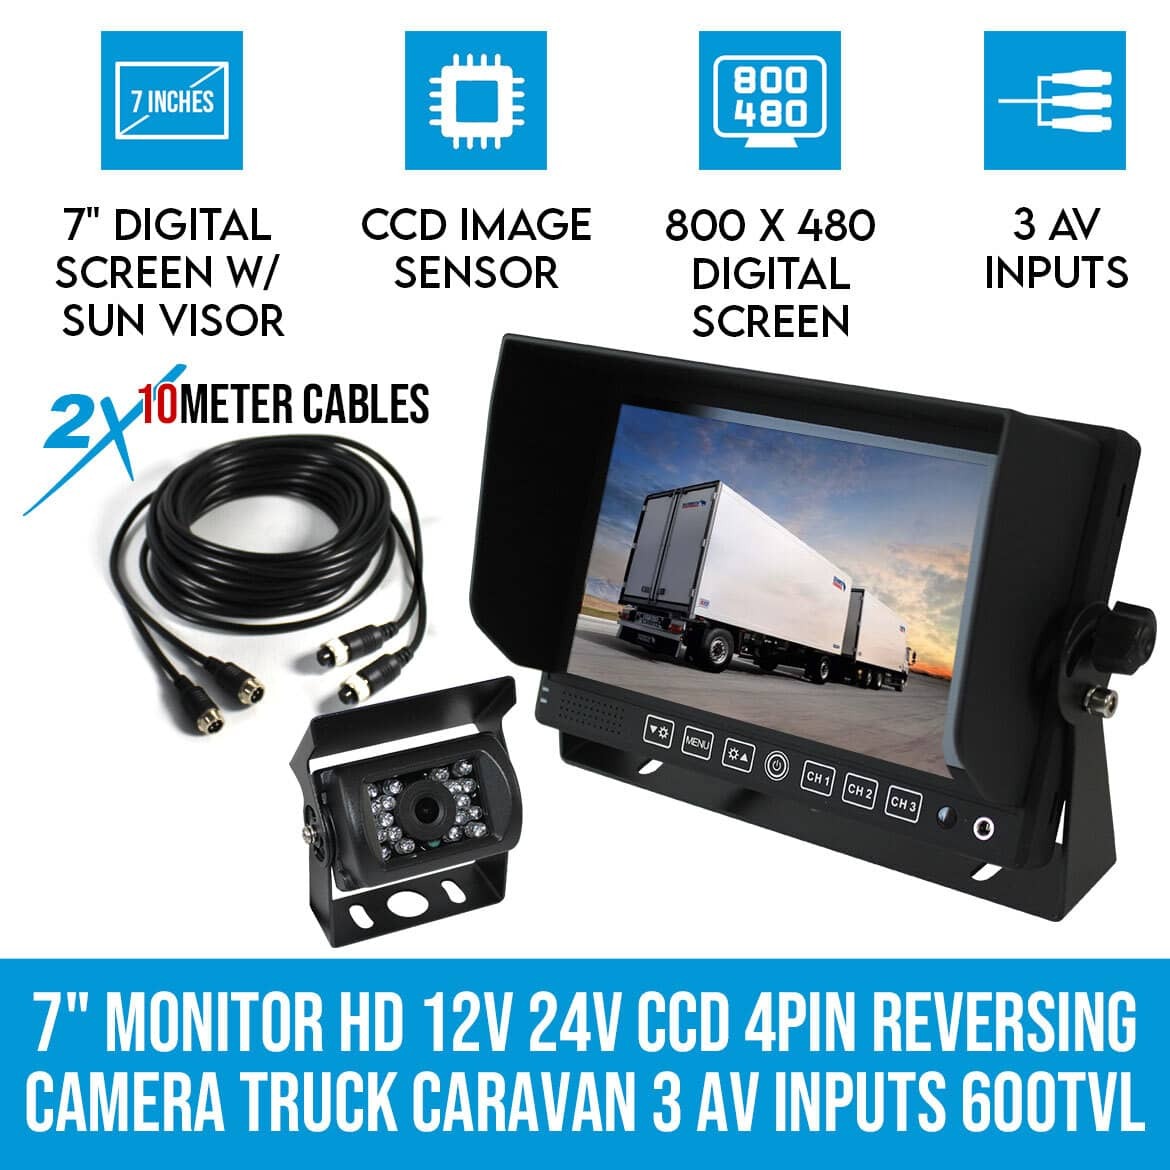 Pyle PLCMTR71 Trailer Dual DC 12-24V Back Up Camera For Bus Reverse Parking Rearview Back Up Car Camera And Monitor Video System w/ 7 Monitor Van Truck Car Backup Rear View Camera 